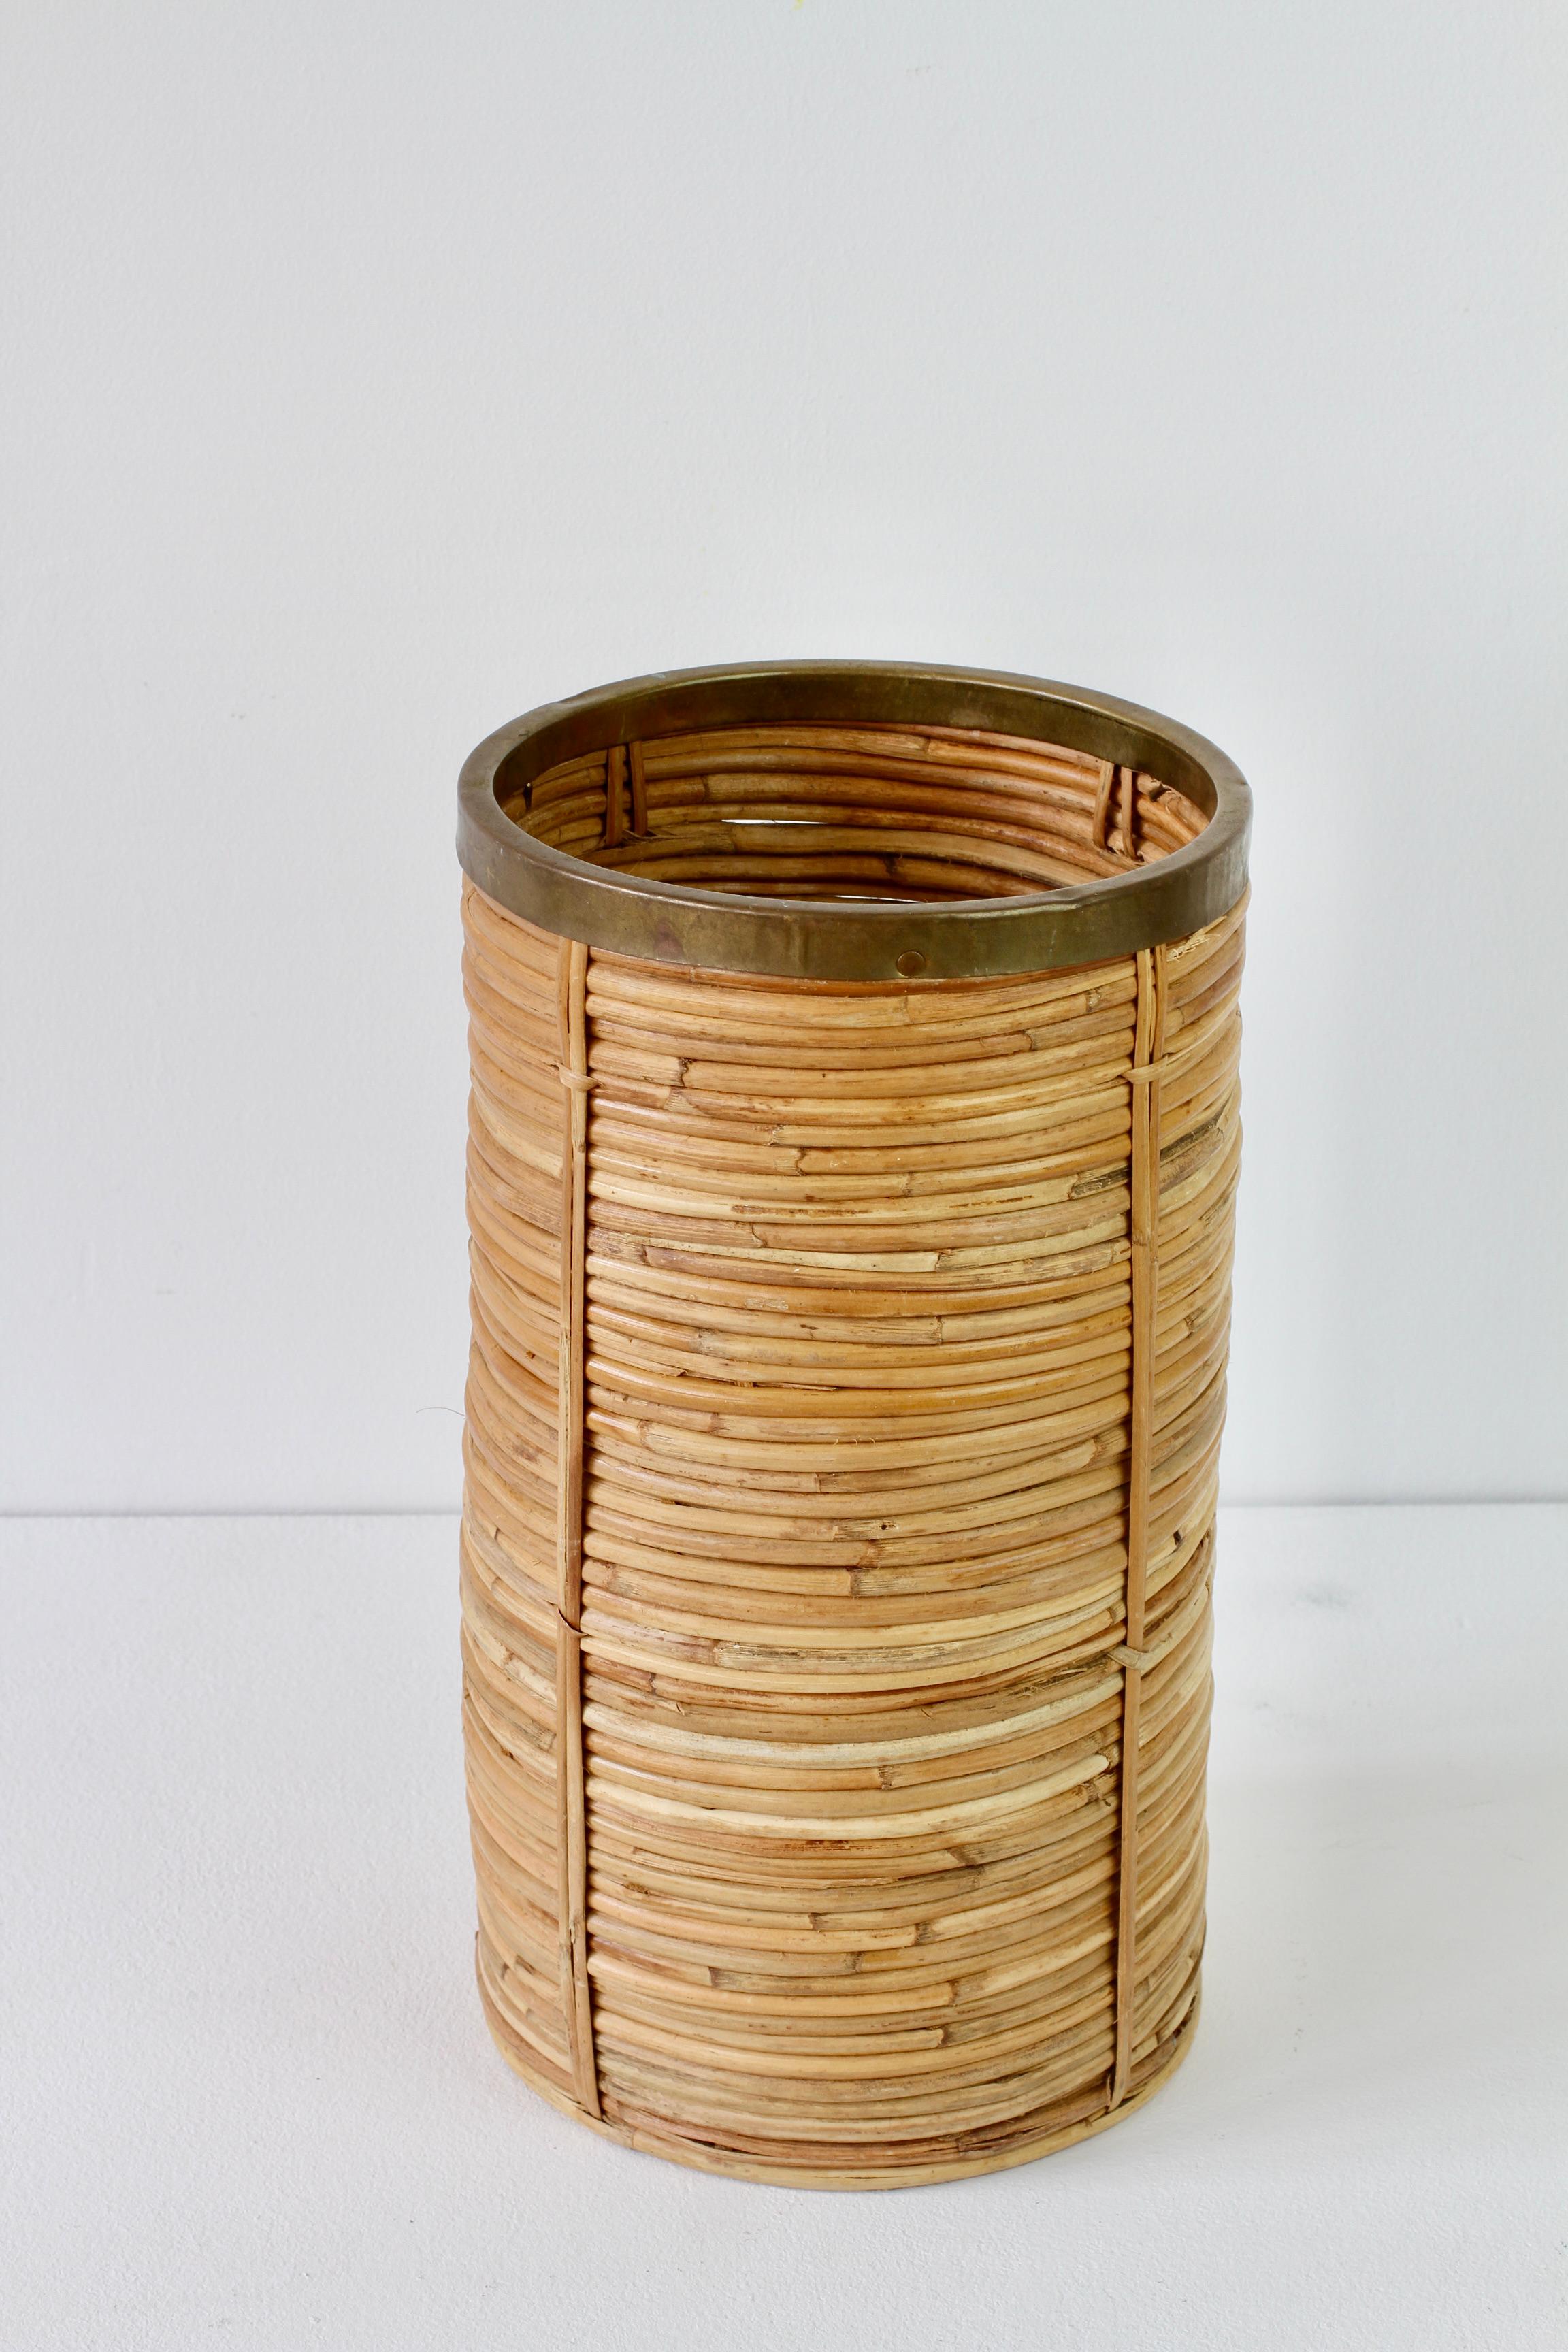 Polished 1970s Vintage Mid-Century Italian Bamboo Waste Paper Basket or Umbrella Stand